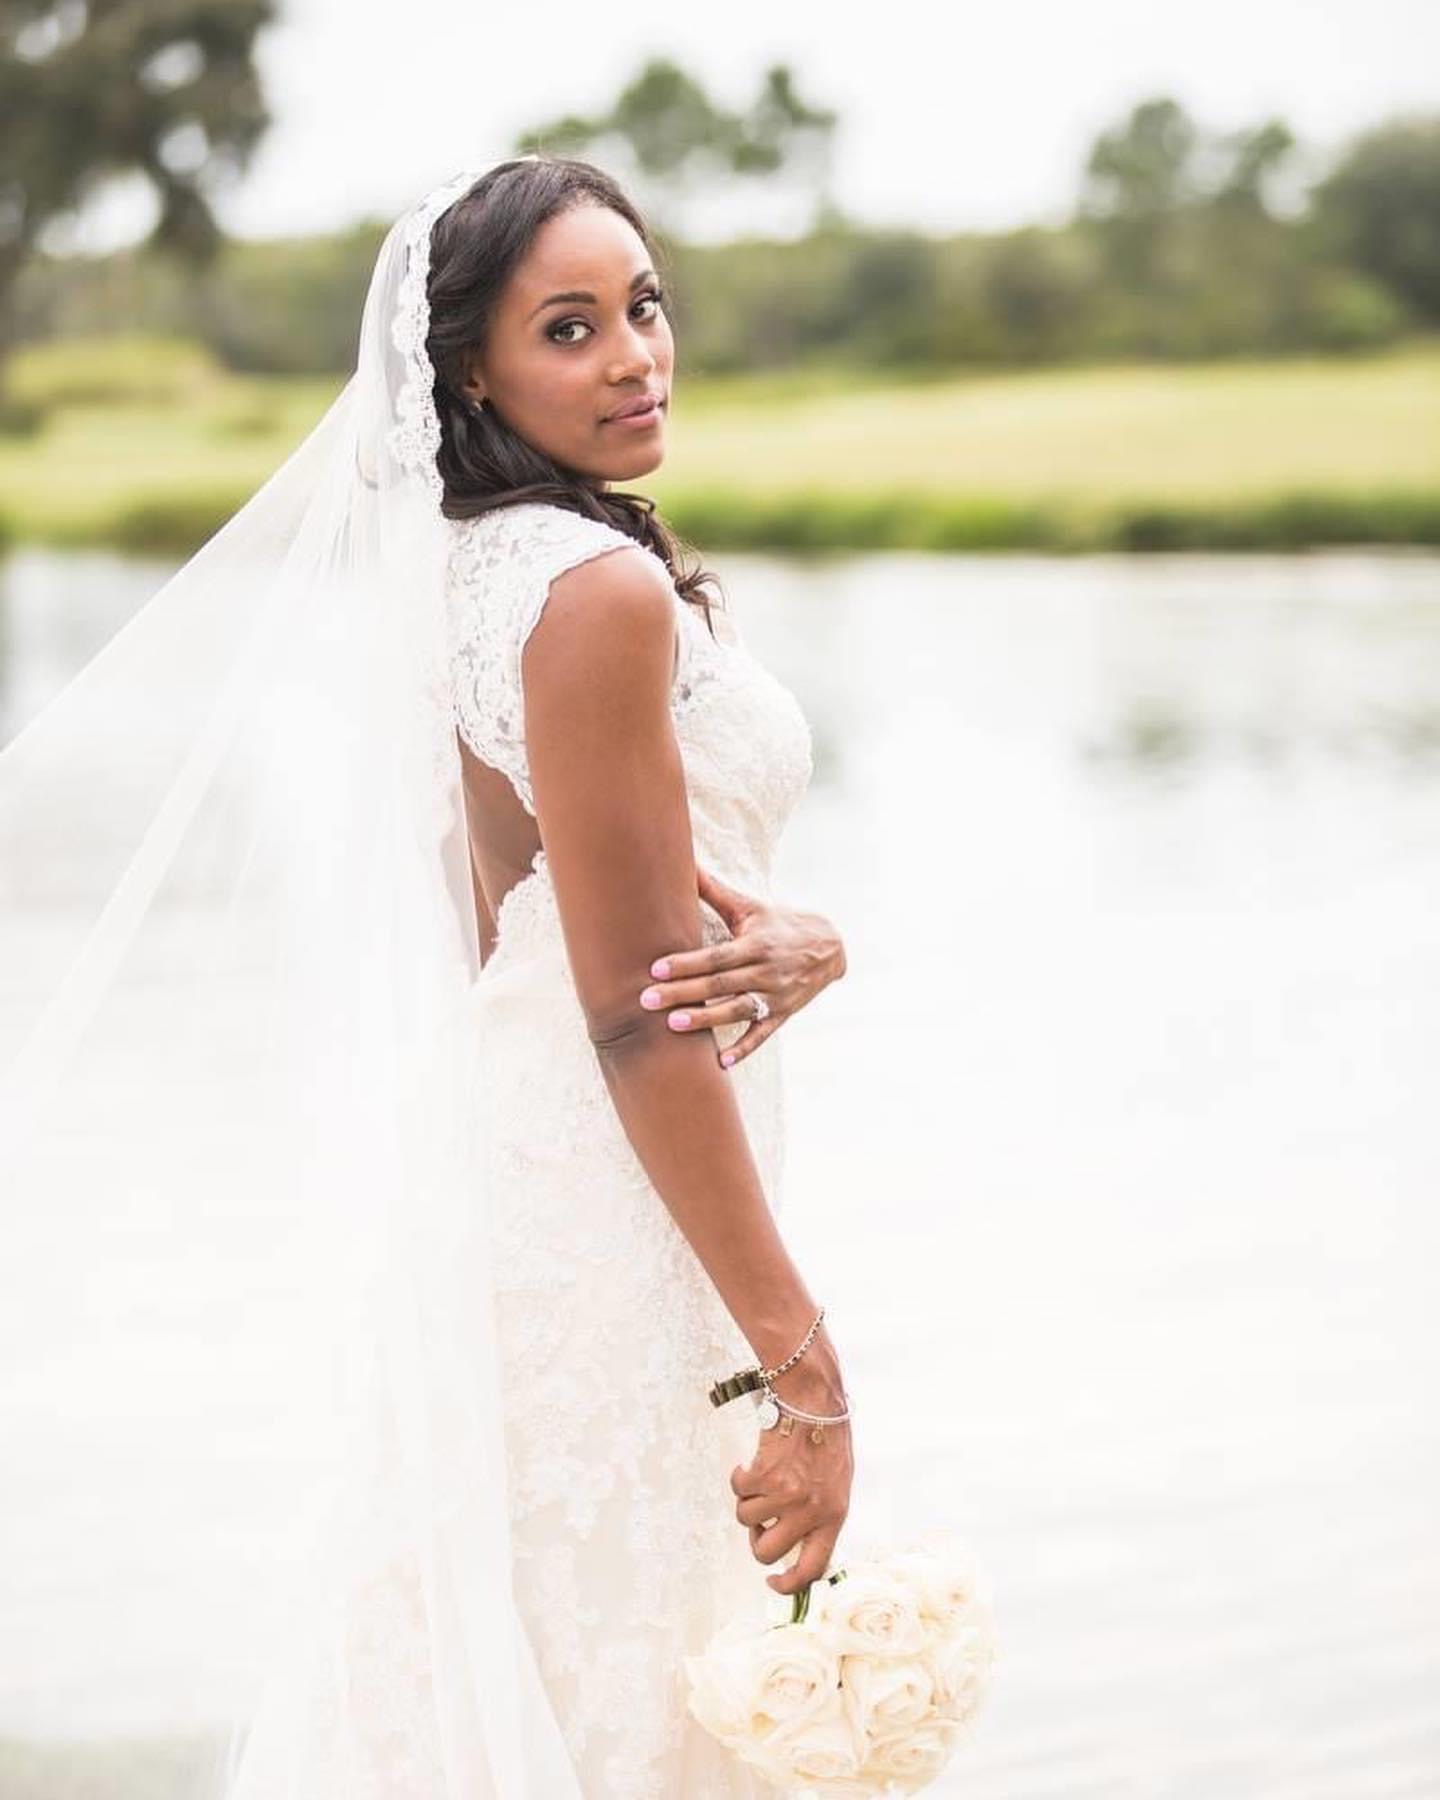 Beautiful Bride by the Lake: Hair and Makeup by Kristy's Artistry Design Team